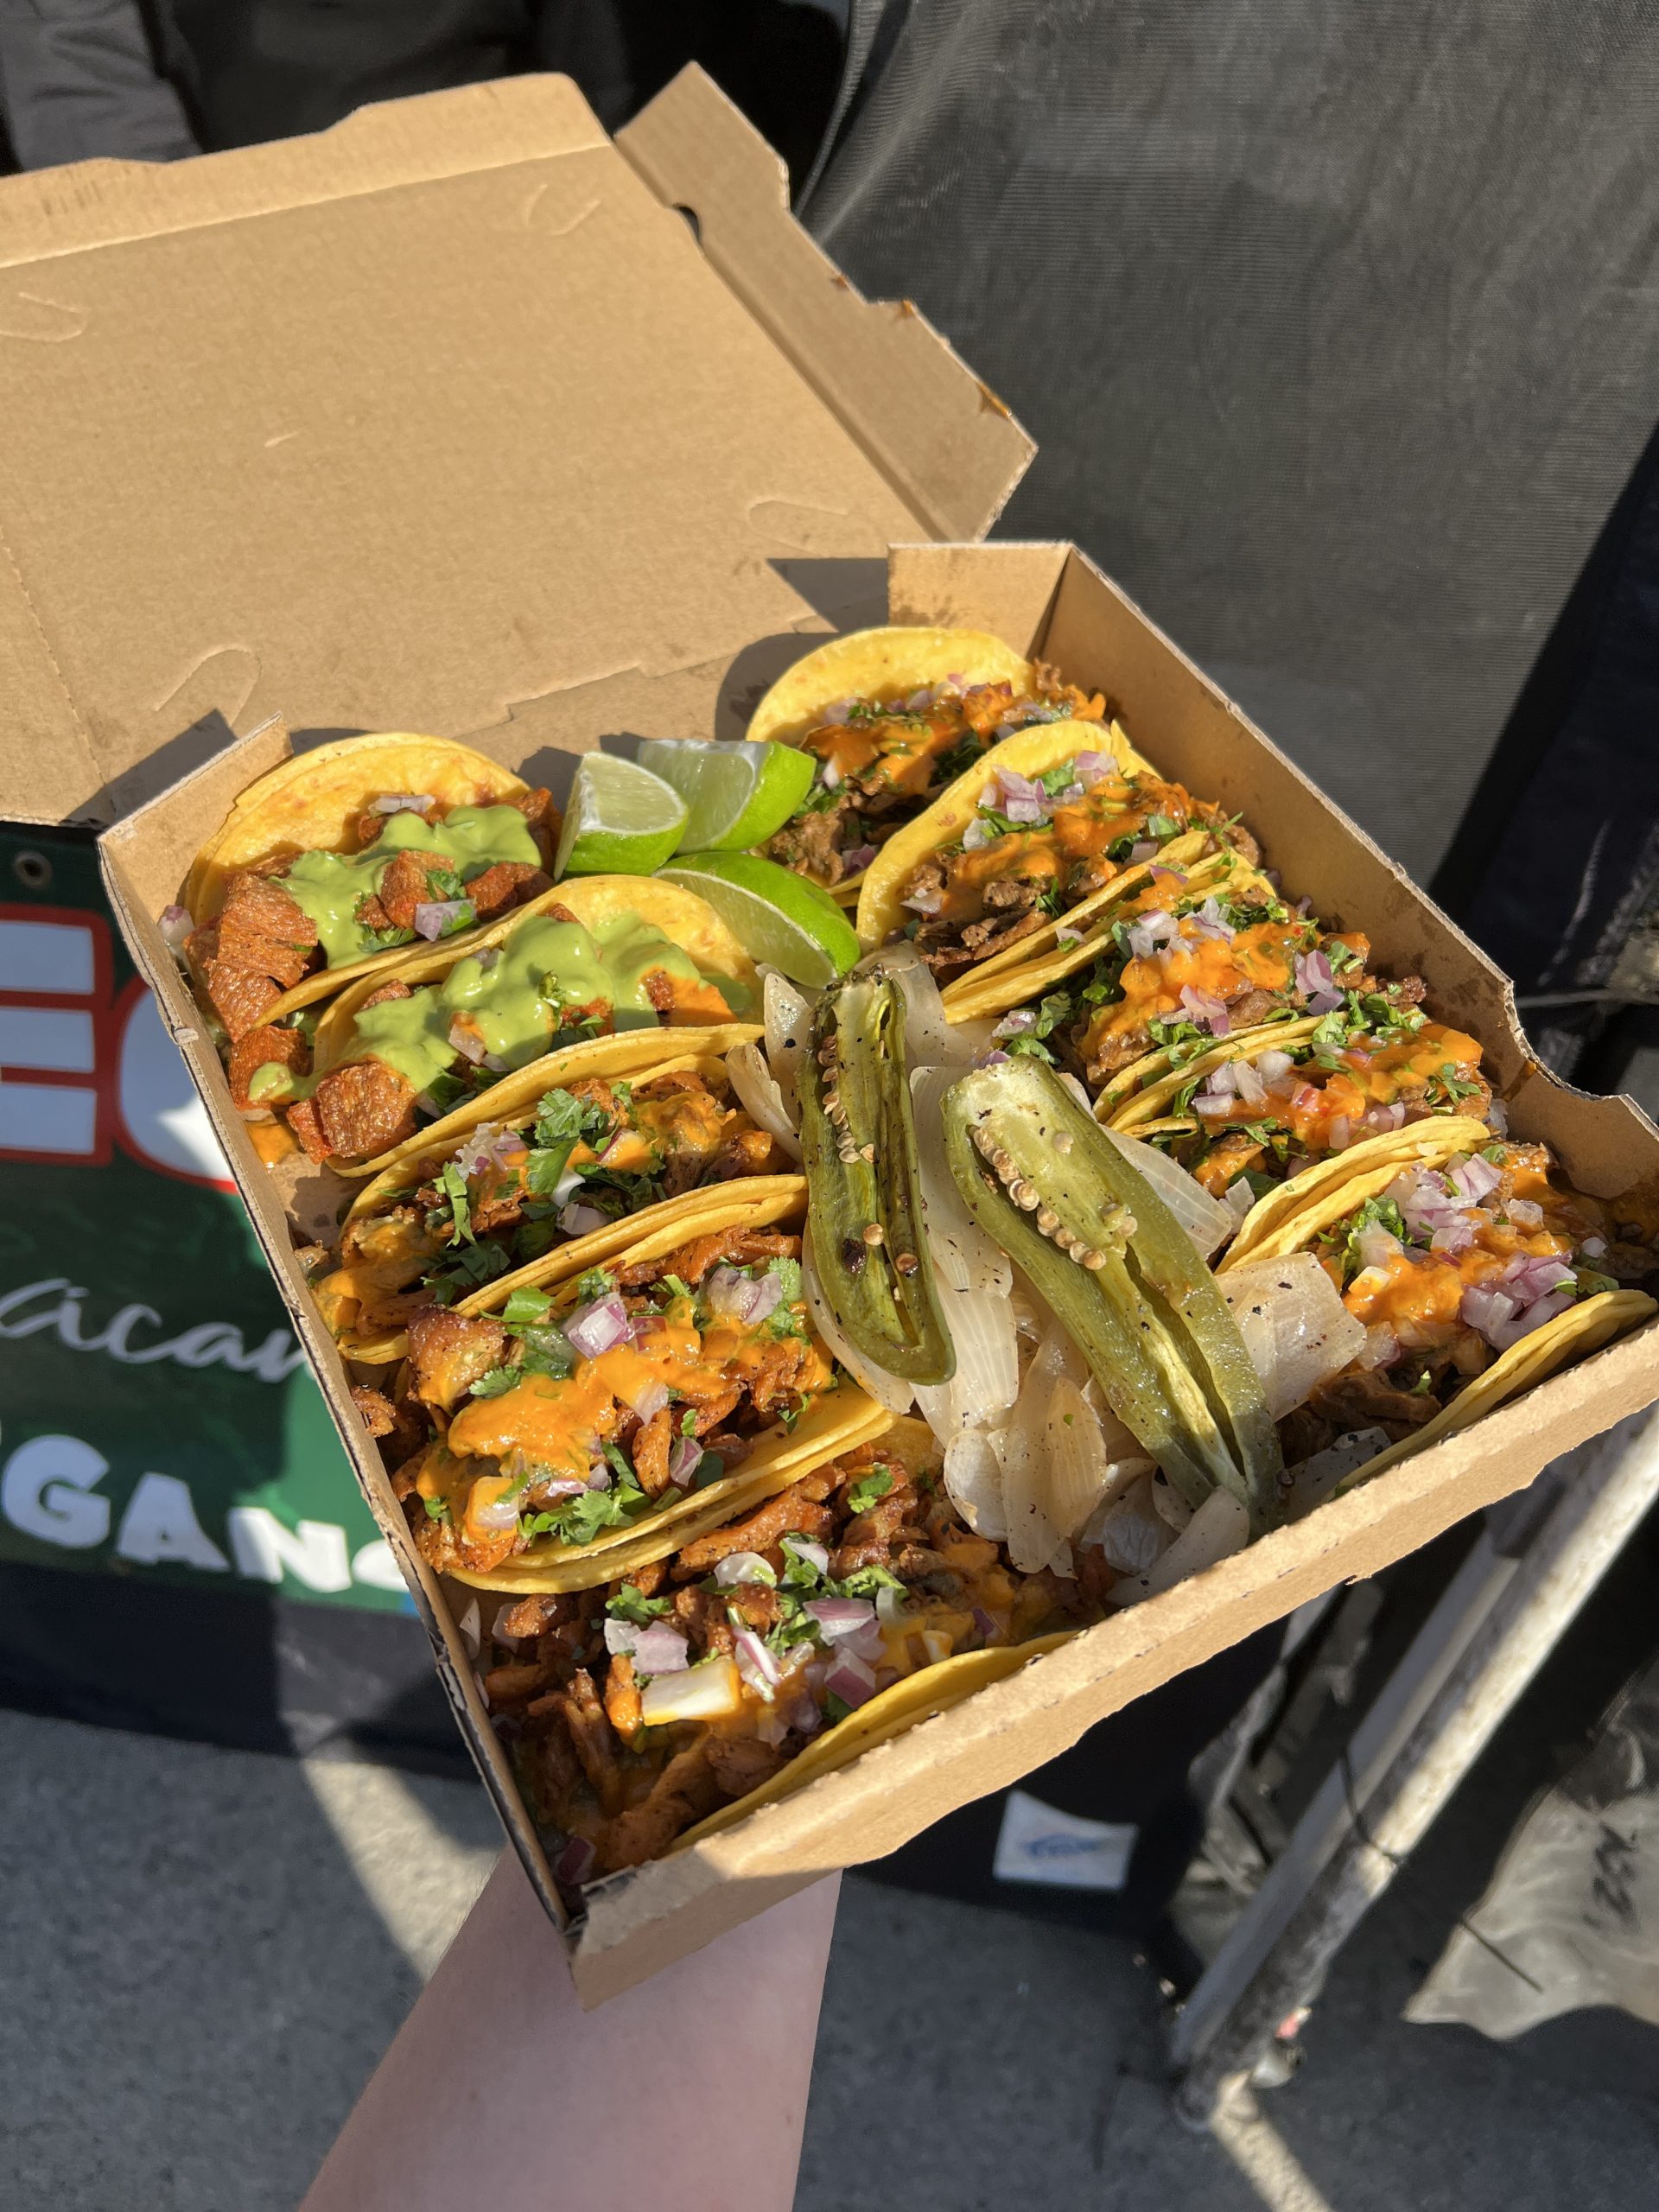 Person holding box of tacos from El Compa Veagno